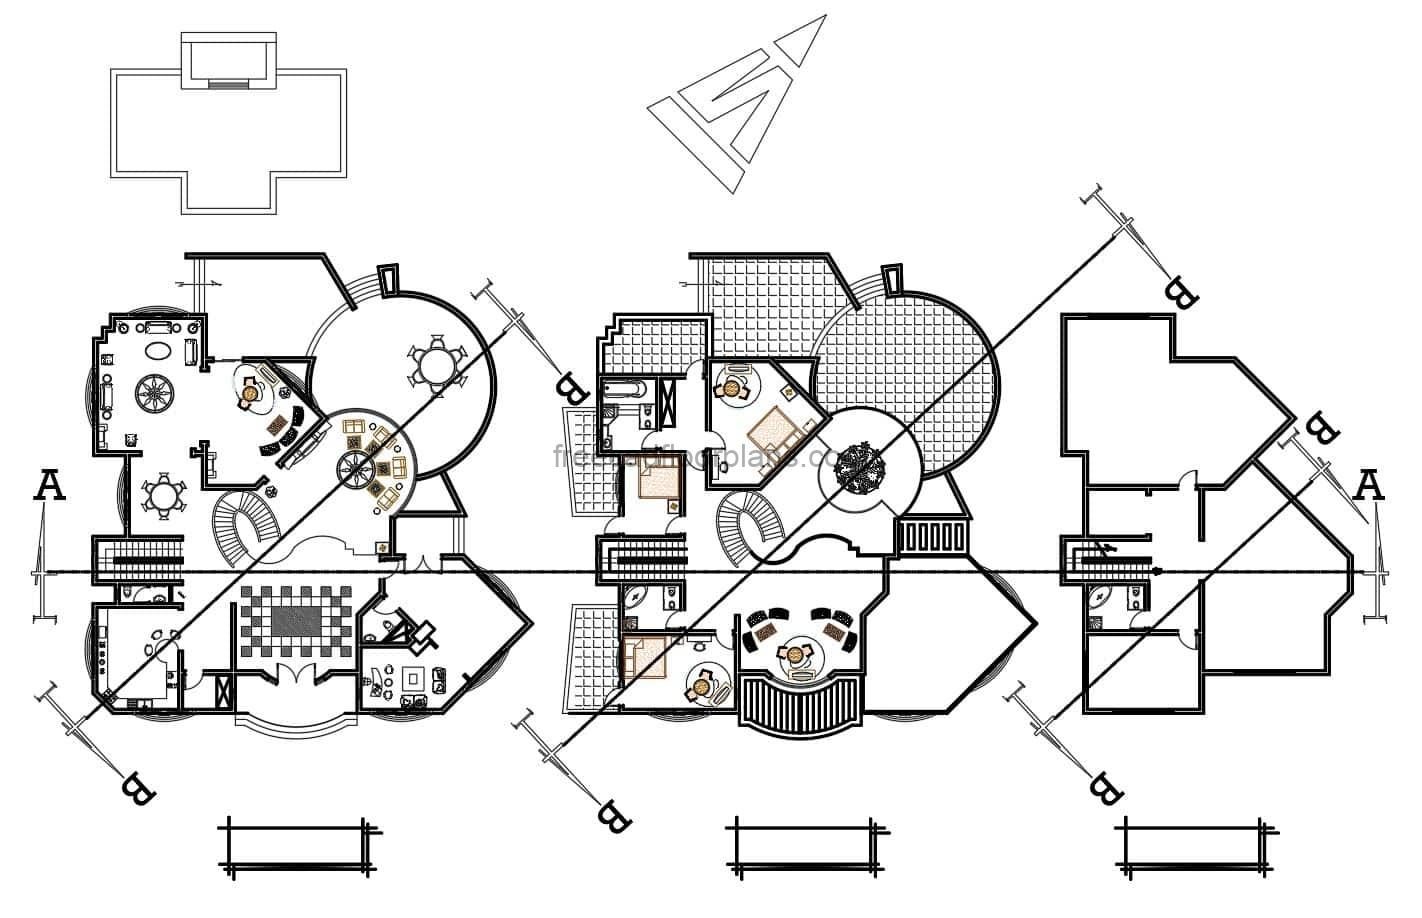 AutoCAD DWG plans of a modern style two level residence with pool area, interesting volumetrics mixing curved and rectangular shapes, interior space furnished with AutoCAD blocks. Basic architectural layout with three bedrooms on the second level and large terrace, first level living room, kitchen, dining room, family room, terraces, patio with pool and jacuzzy. plans for free download in DWG format